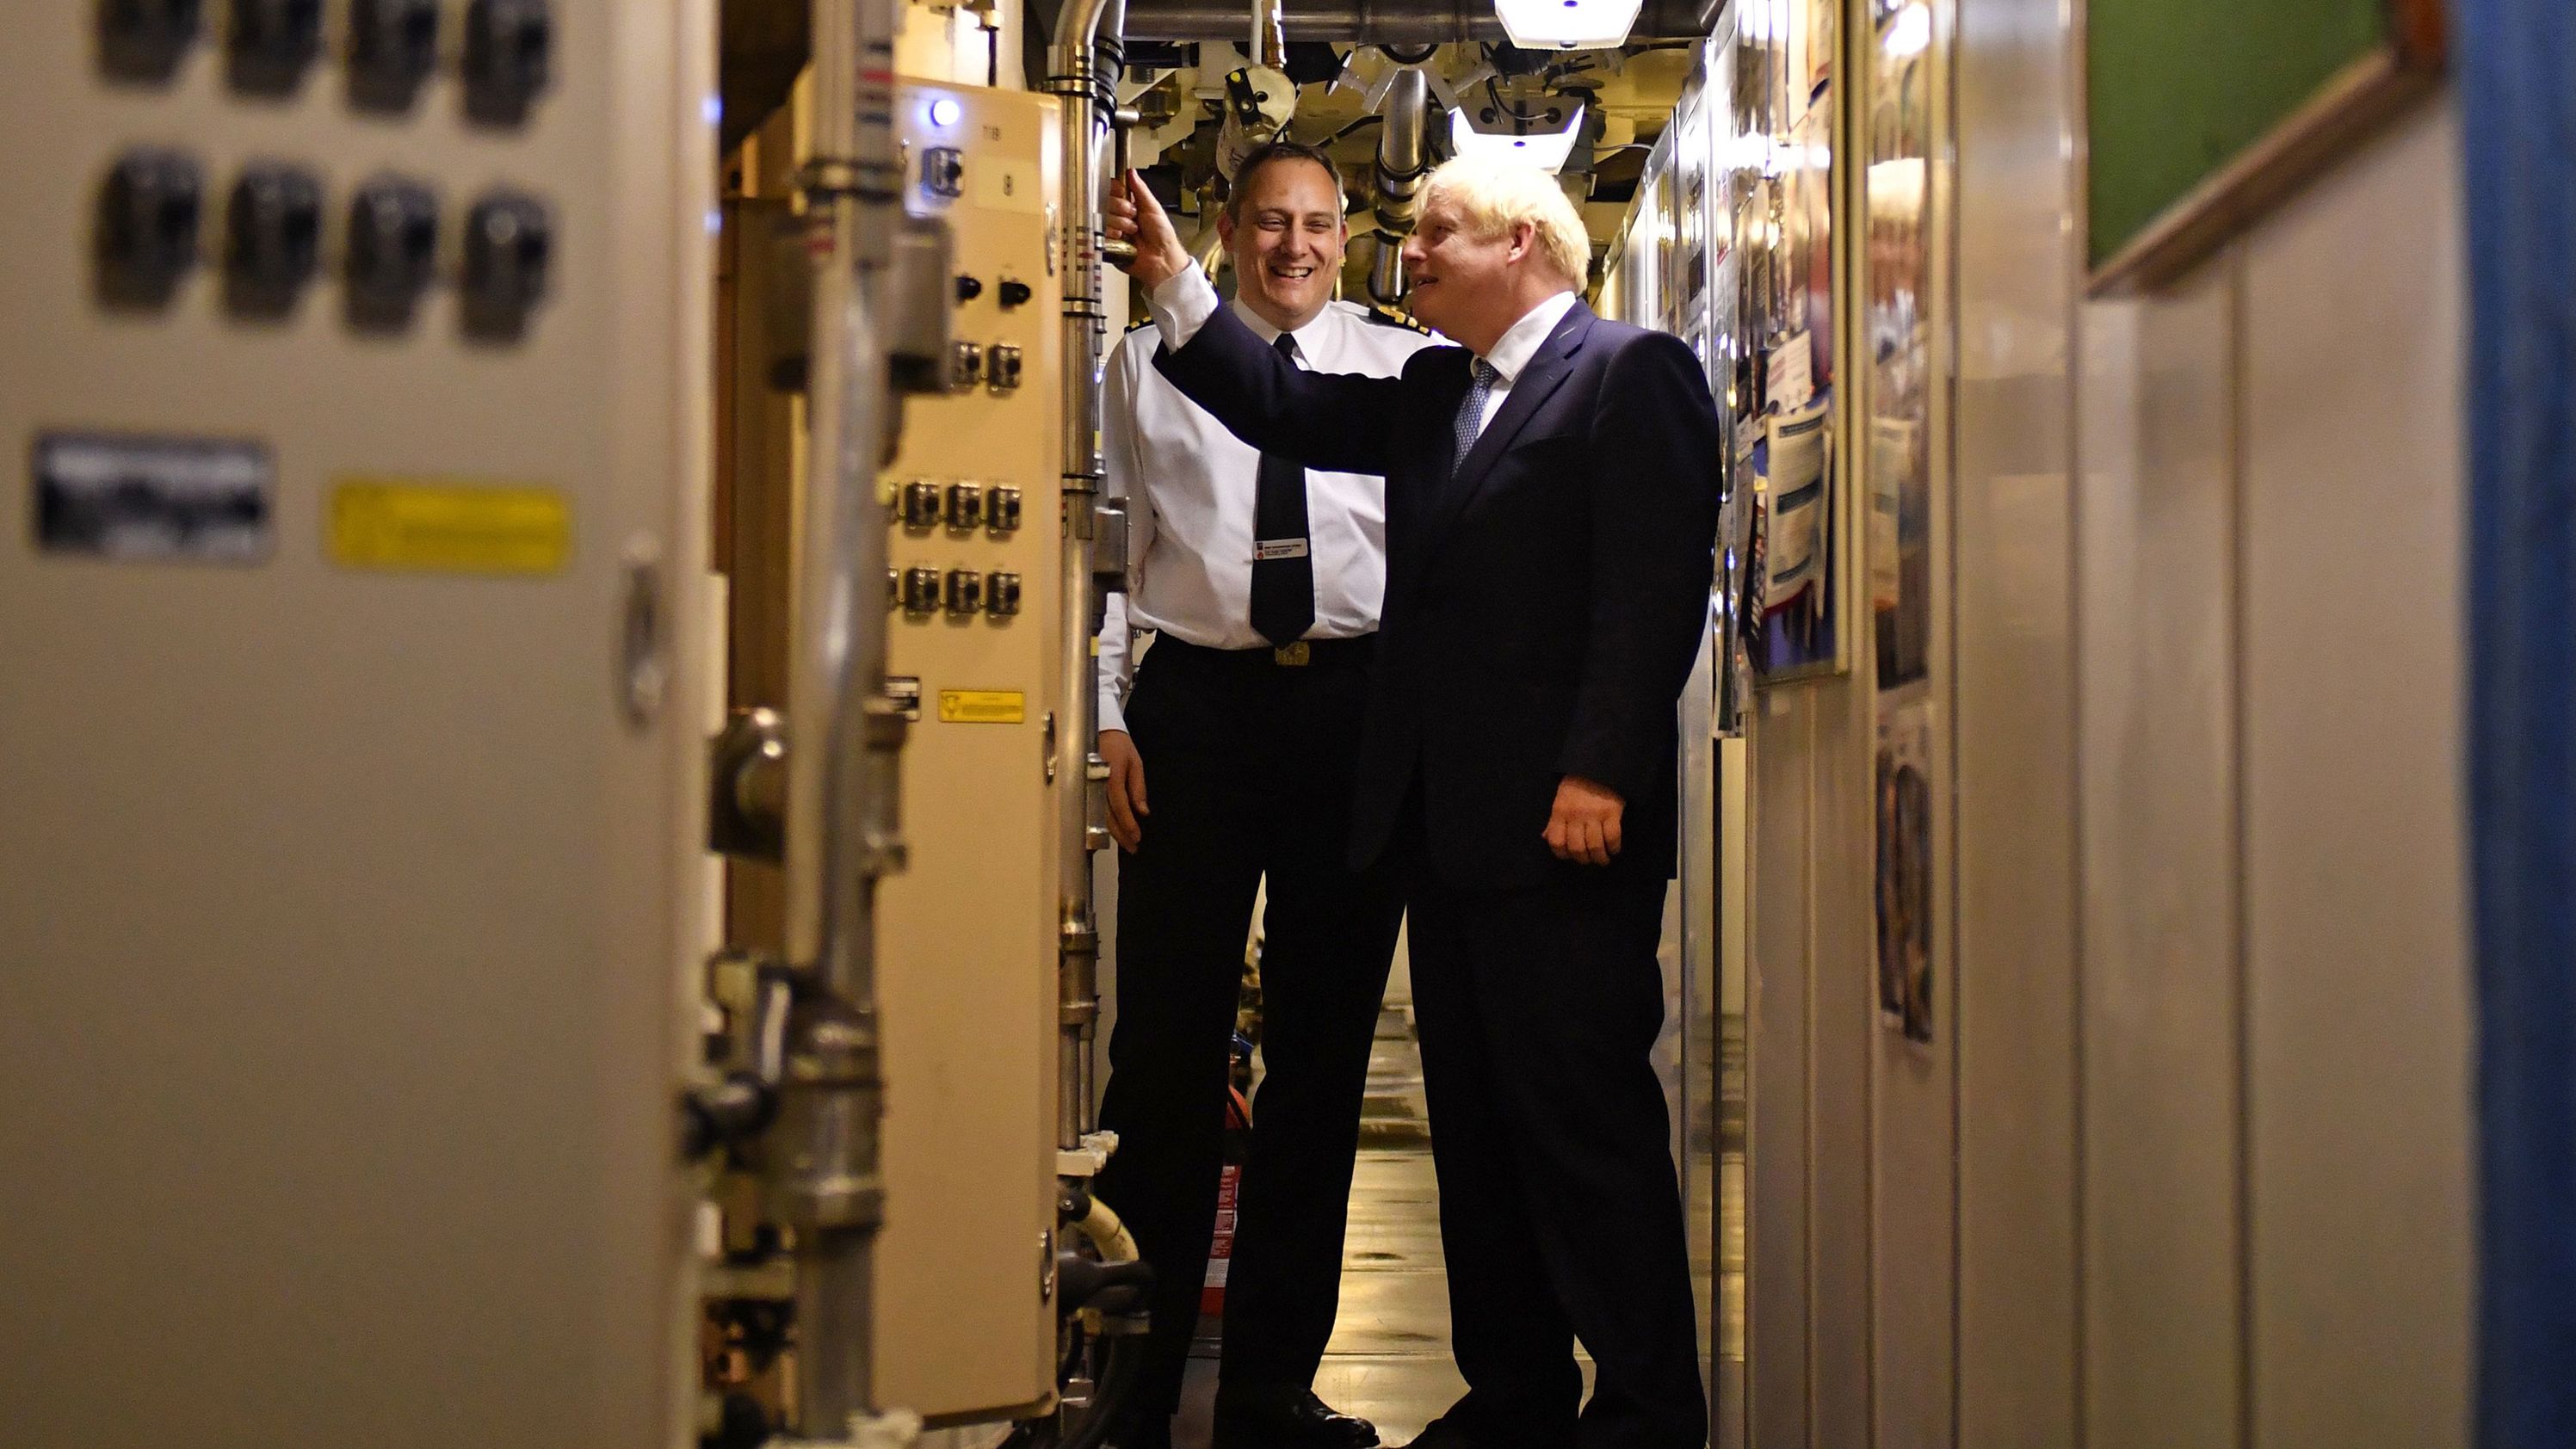 Commander Justin Codd, left, chats with British Prime Minister Boris Johnson  aboard Vanguard-class submarine HMS Victorious during a visit to the Faslane naval base  north of Glasgow, Scotland on July 29, 2019.